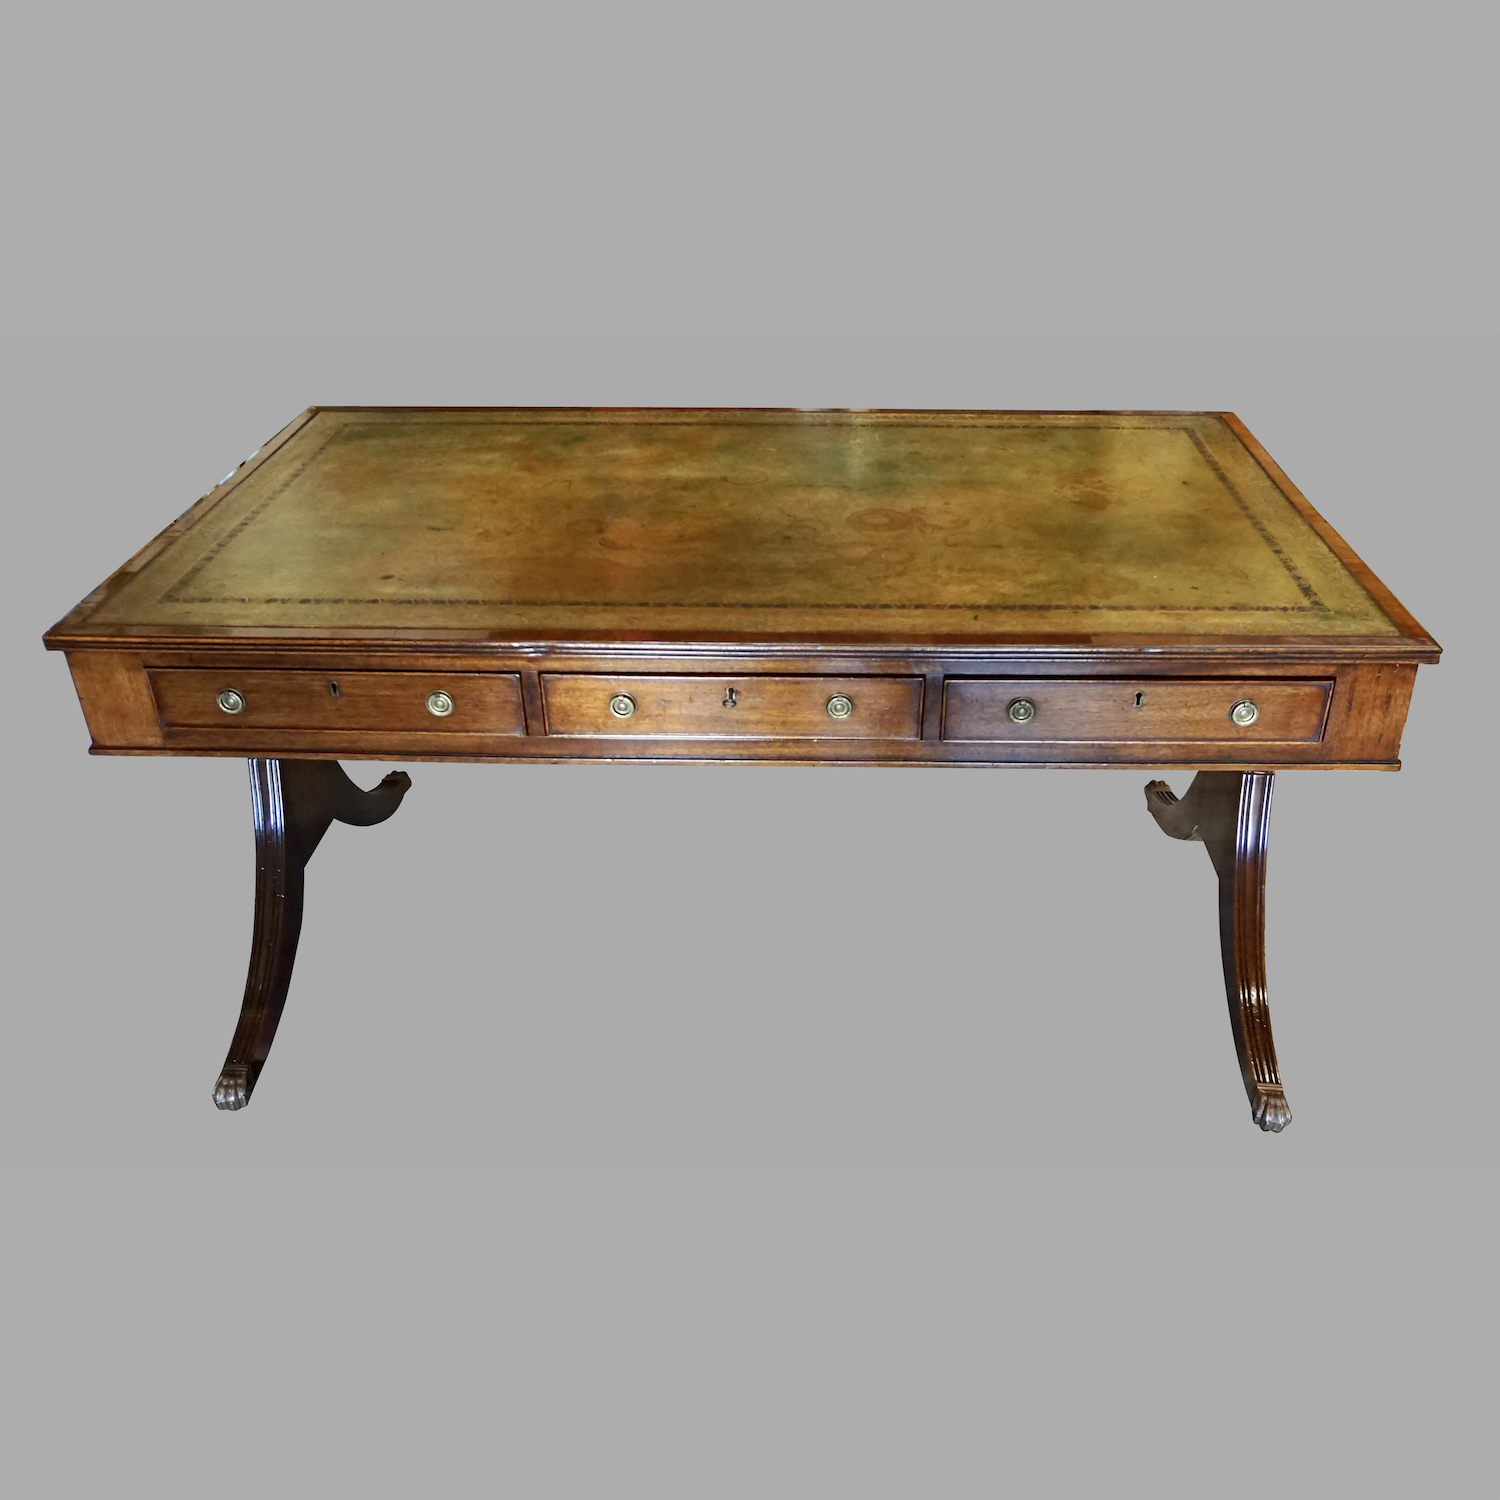 english-regency-style-mahogany-partners-writing-table-with-gilt-tooled-leather-top-c323-2